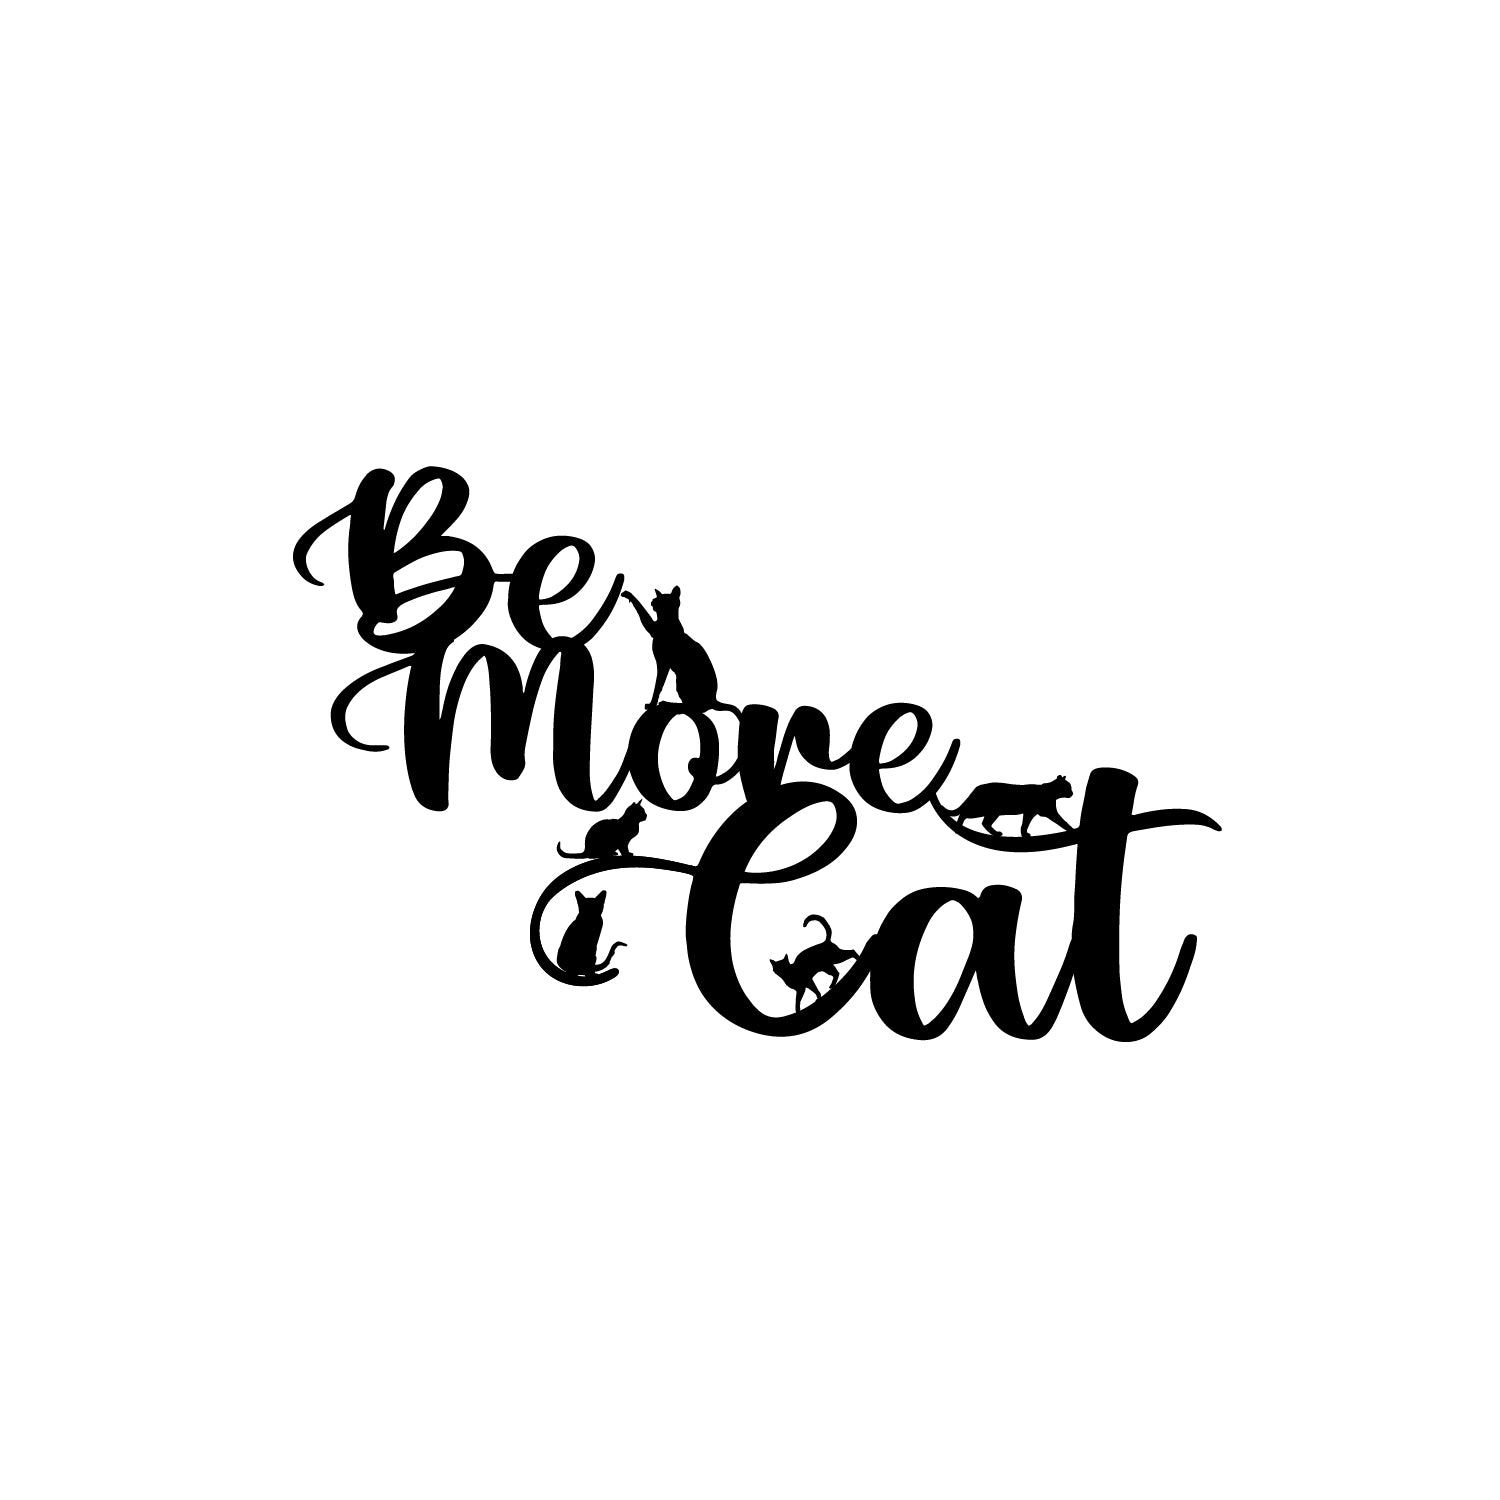 "Be More Cat" Black Engineered Wood Wall Art Cutout, Ready to Hang Home Decor